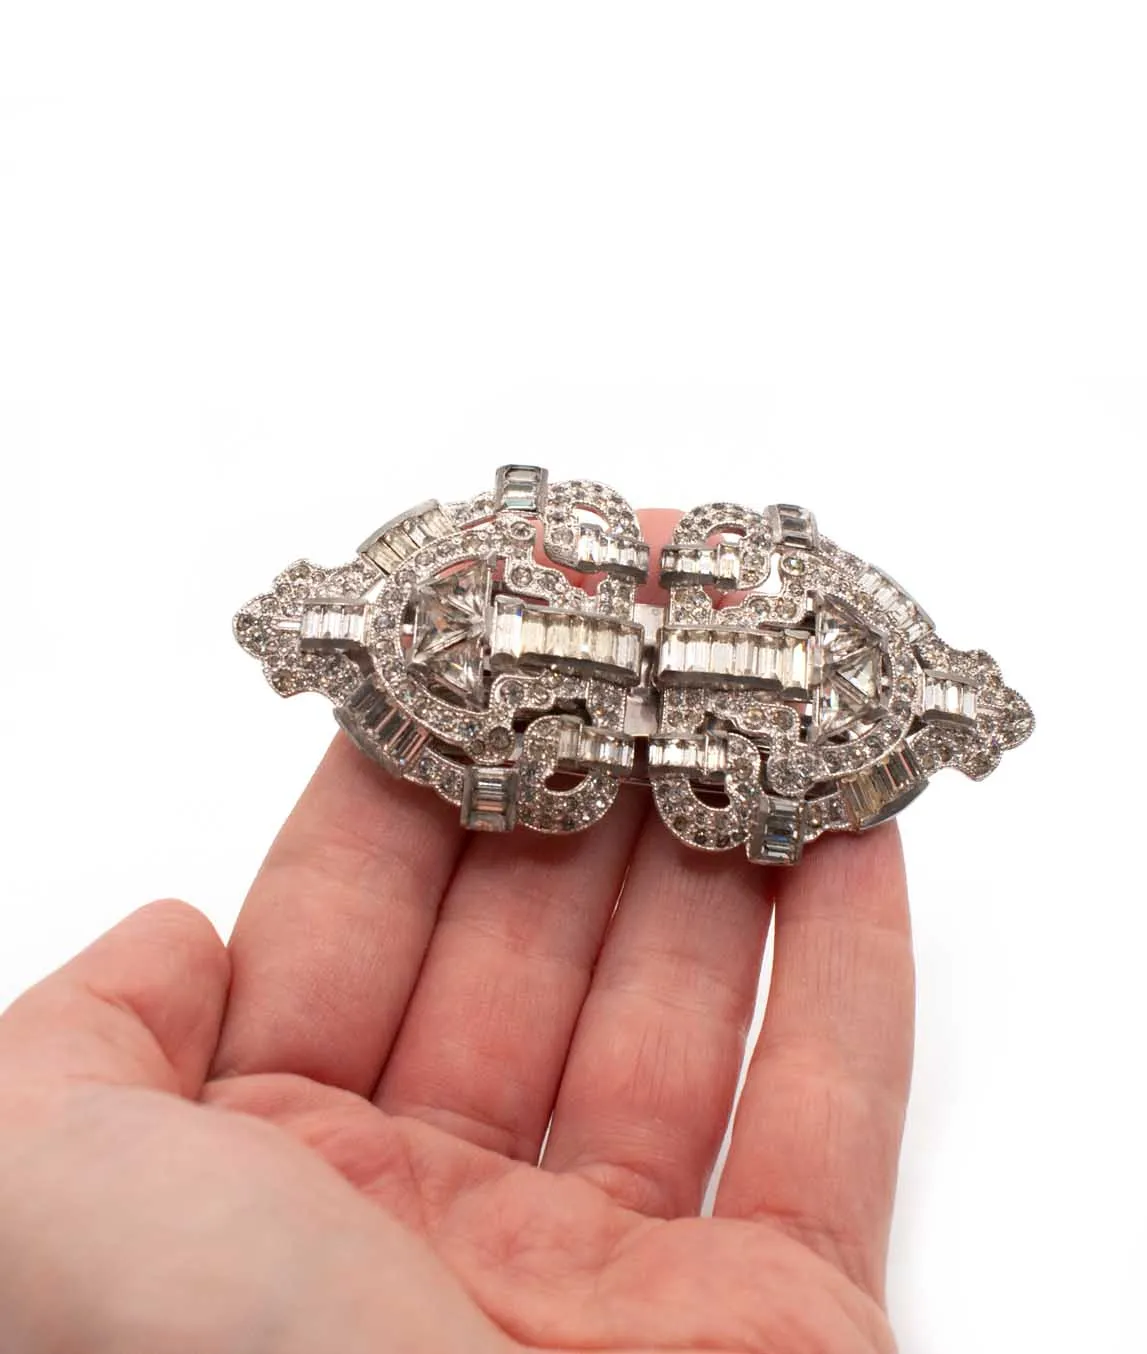 Large Art Deco double dress clip brooch held in a hand